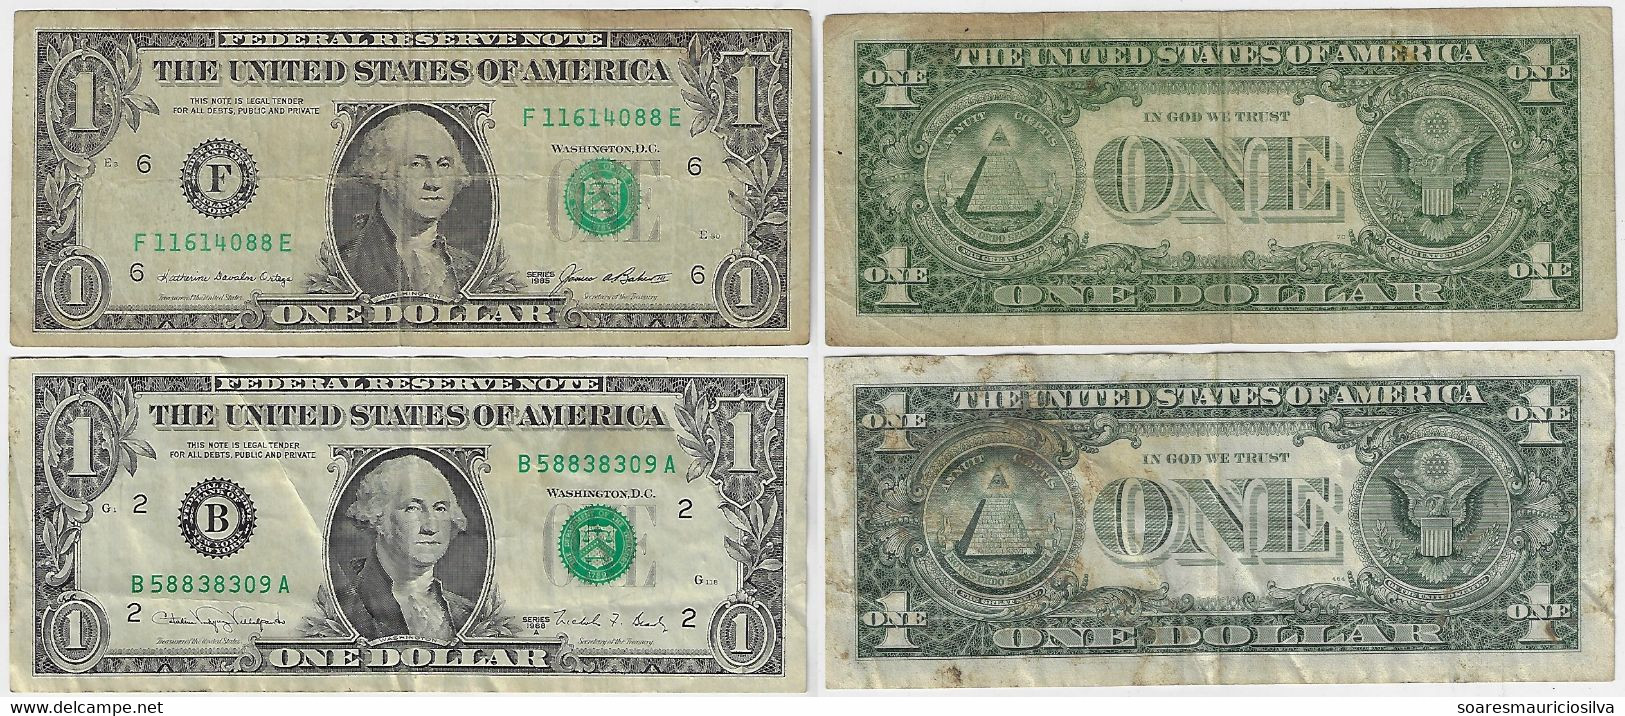 United States Of America USA 2 Banknote 1 Dollar Year 1985 Pick-474 And Year 1988A Pick-480b Both VF - Devise Nationale